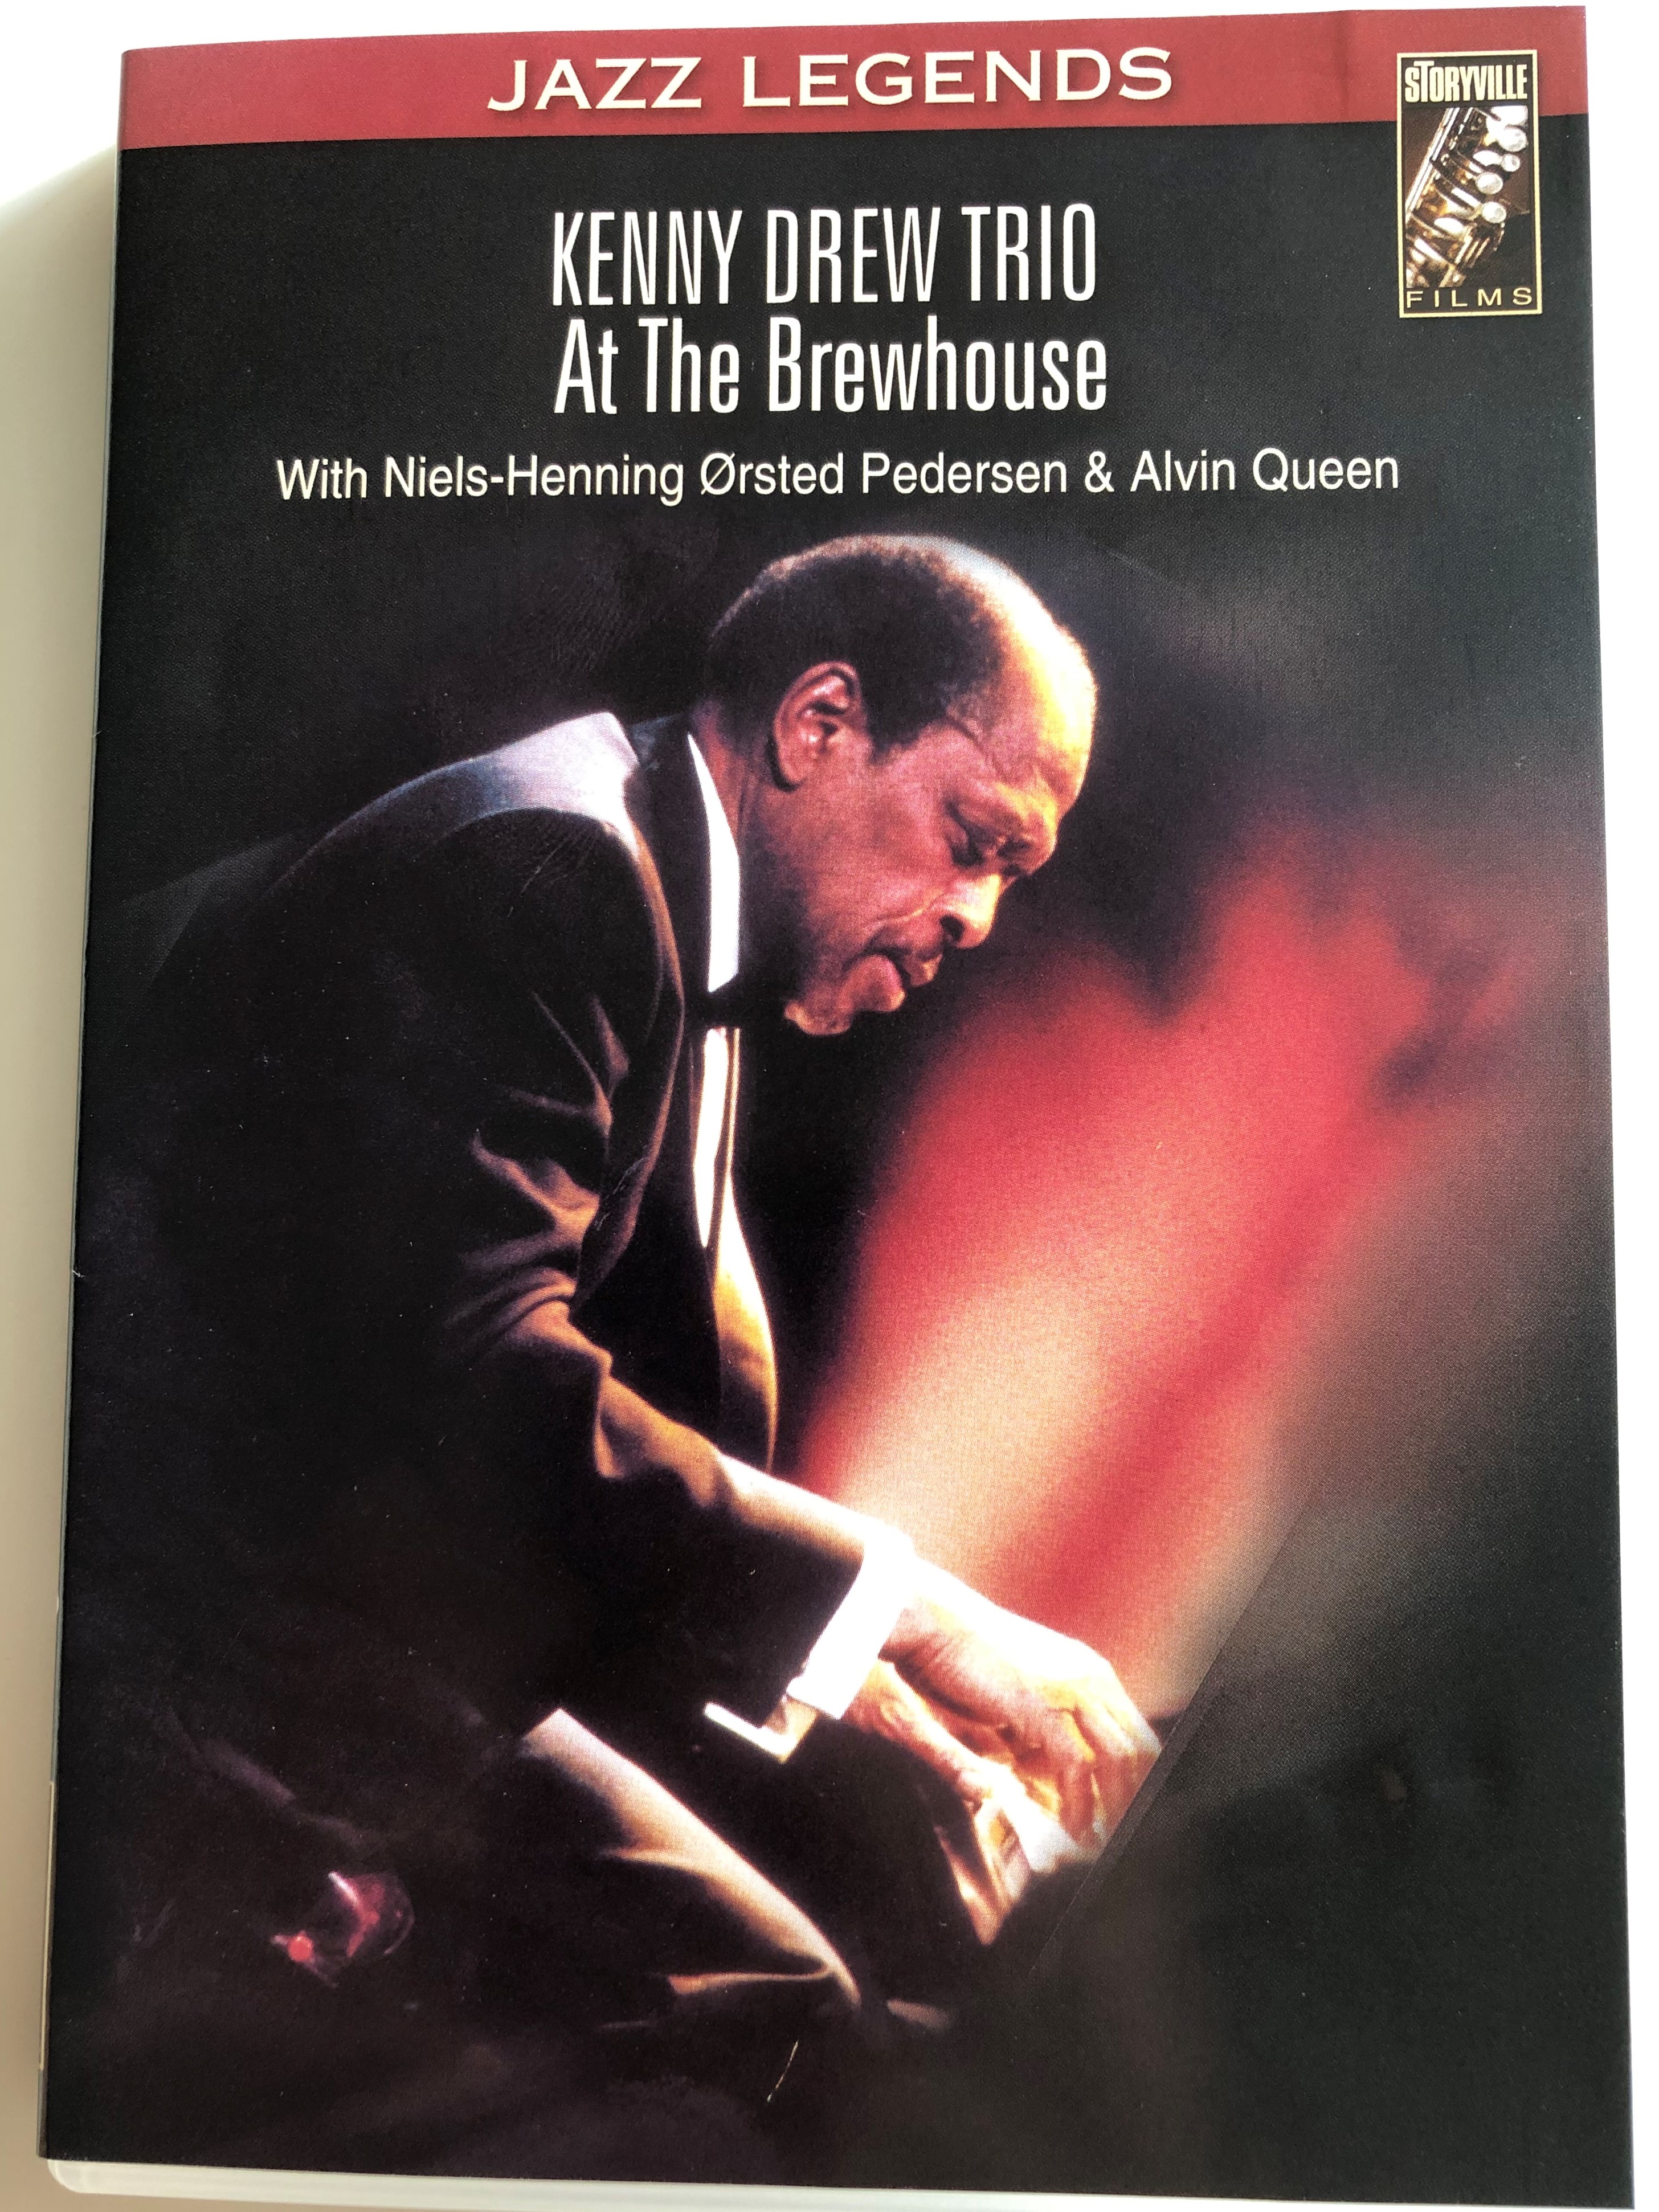 kenny-drew-trio-at-the-brewhouse-dvd-2003-jazz-legends-with-niels-henning-orsted-pedersen-alvin-queen-1-.jpg